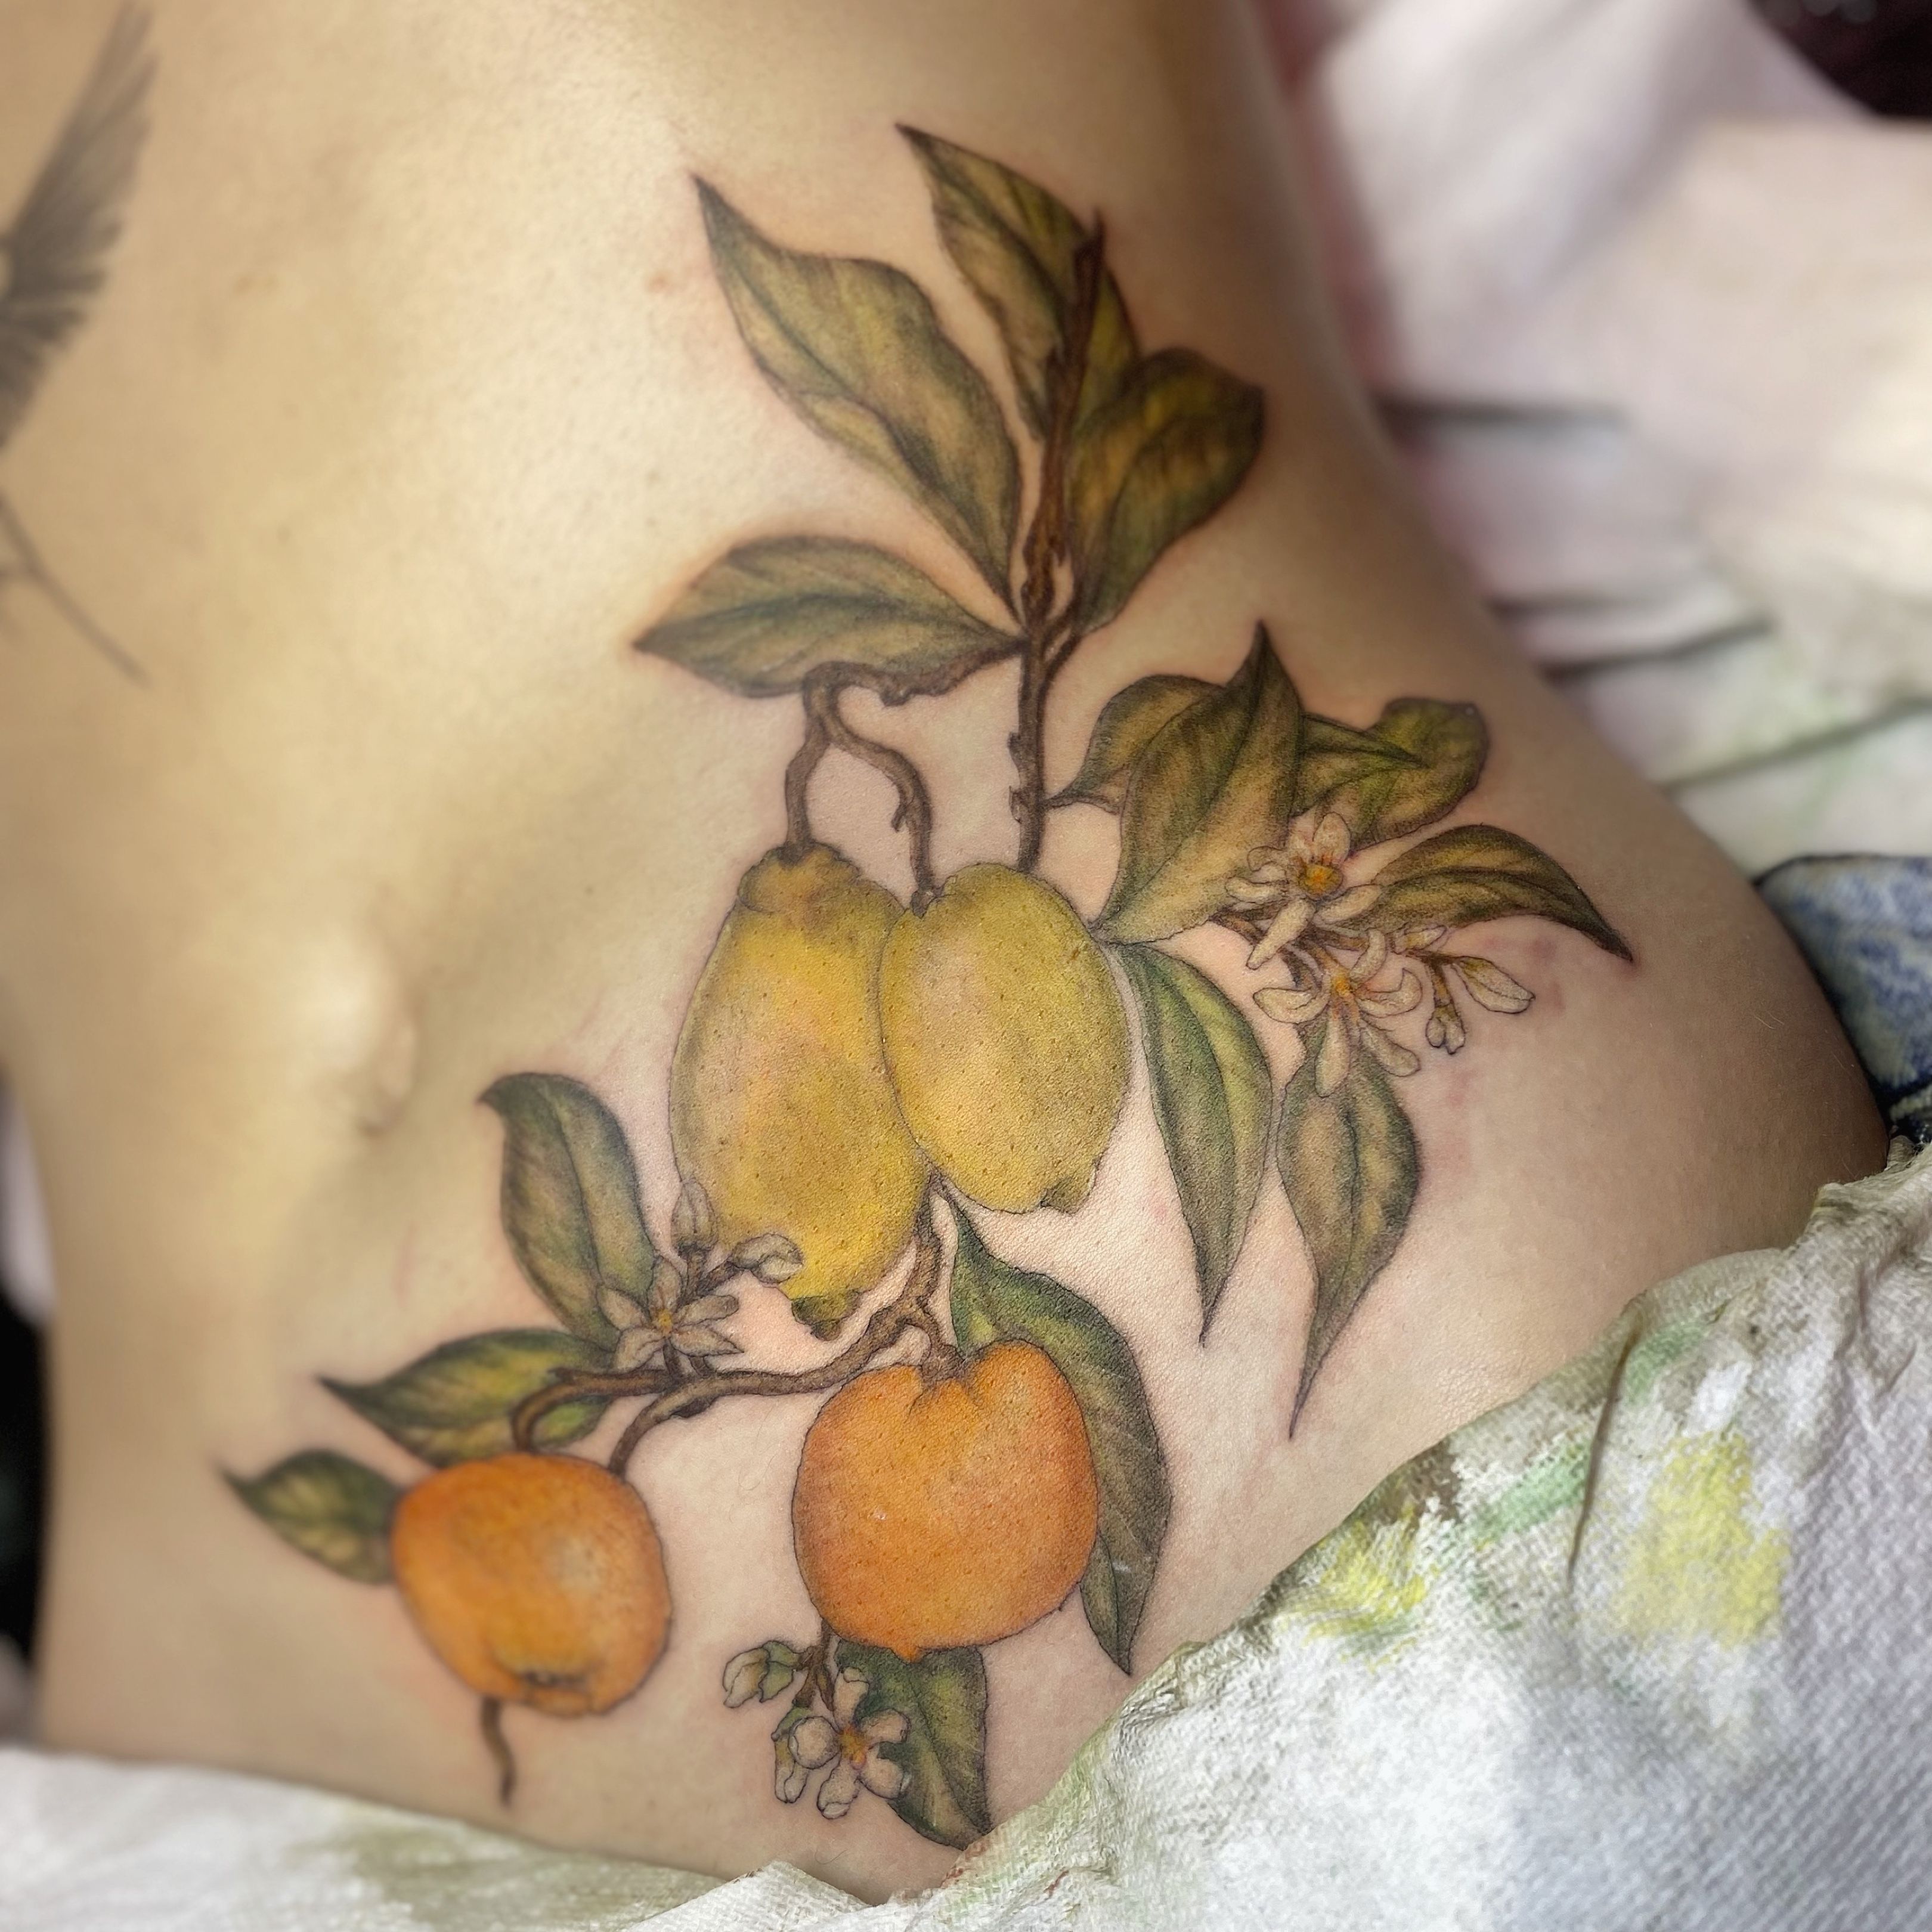 My second tattoo this year by Jia from Paw Tattoo in San Mateo CA A lemon  tree branch  rtattoos